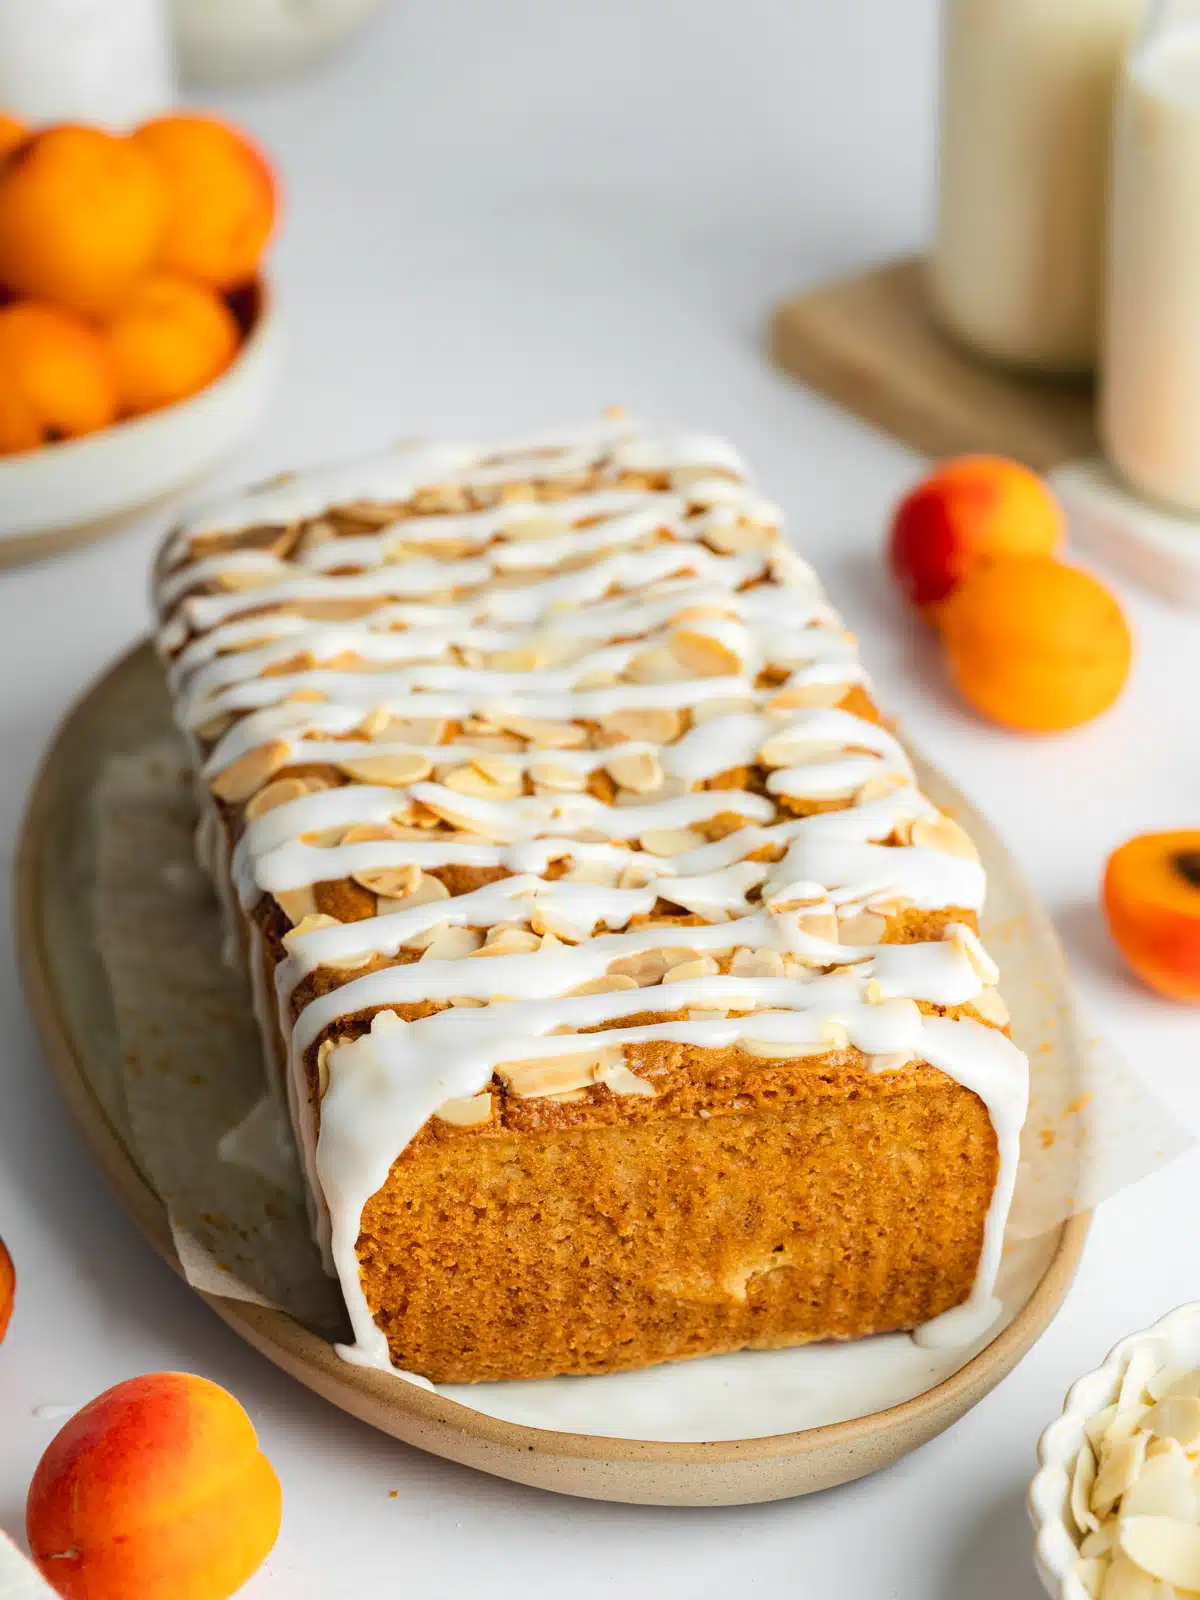 apricot cake with sugar glaze drizzle over the top.